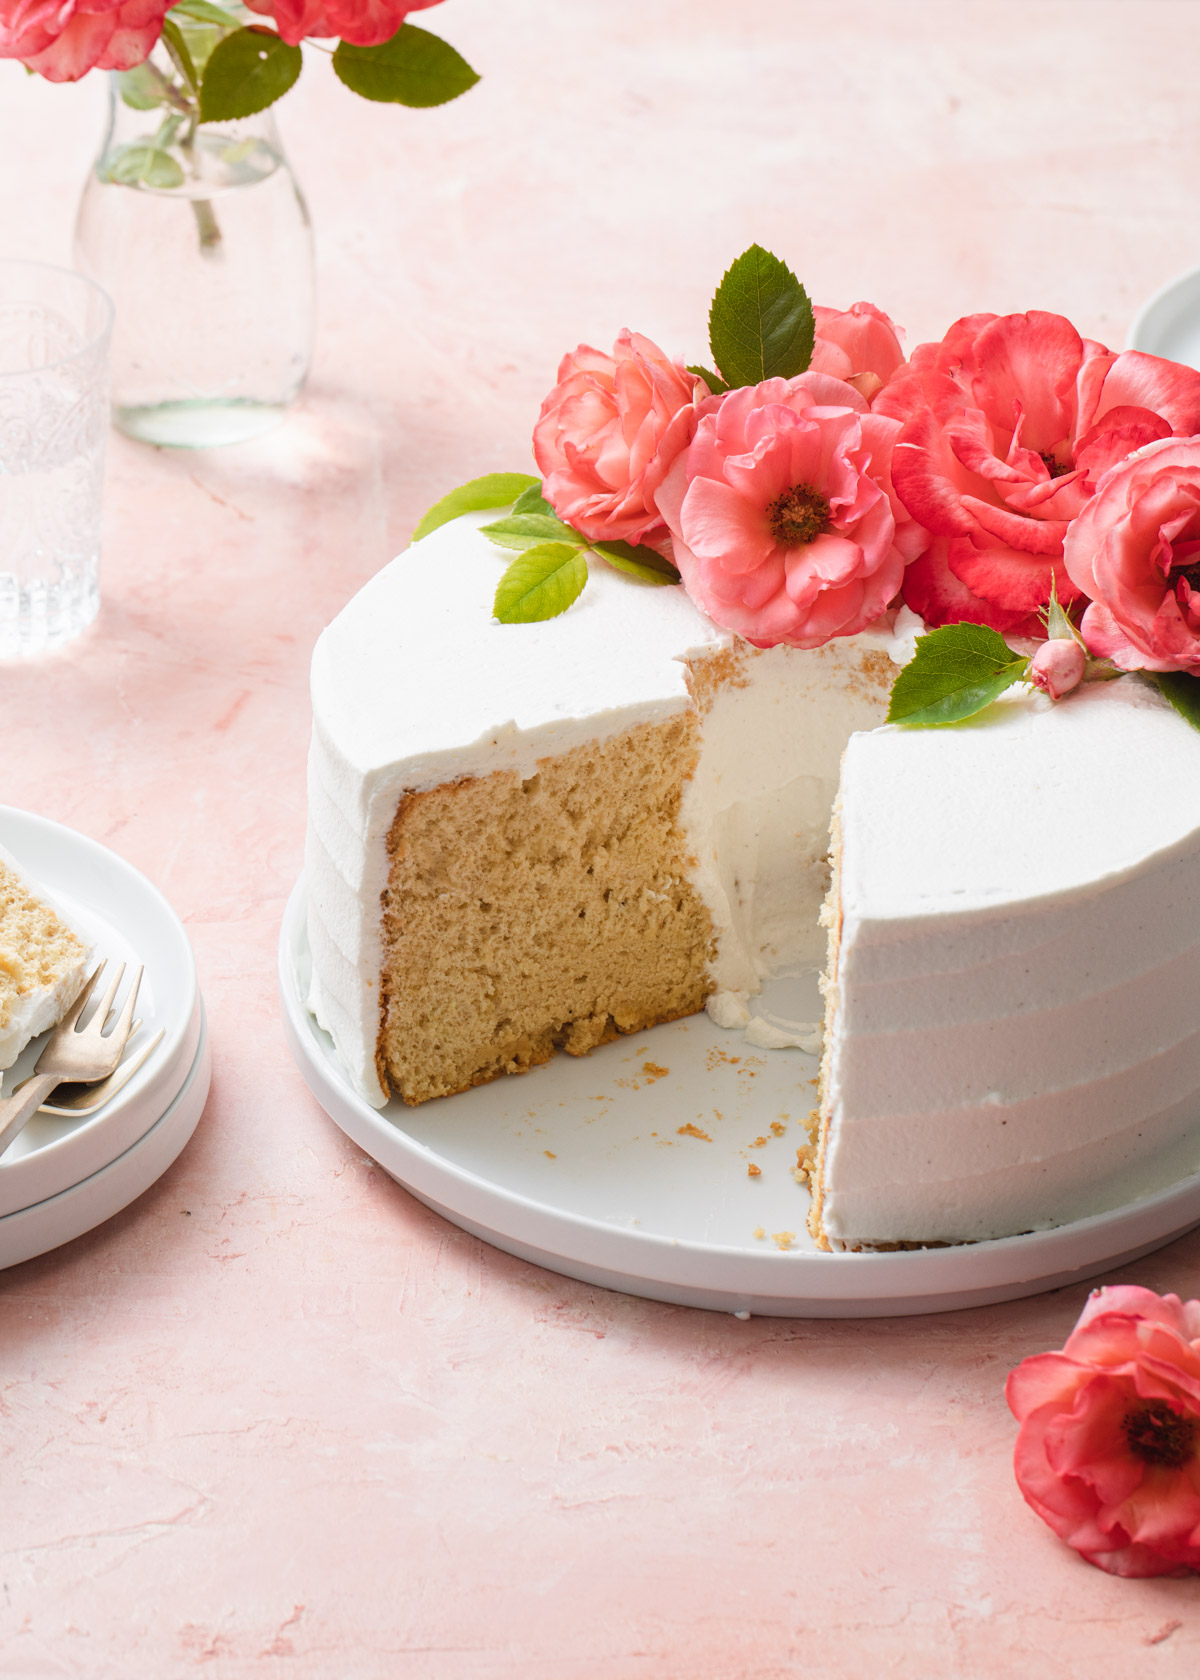 A chiffon cake with whipped cream frosting and fresh pink roses on top set on a white plate